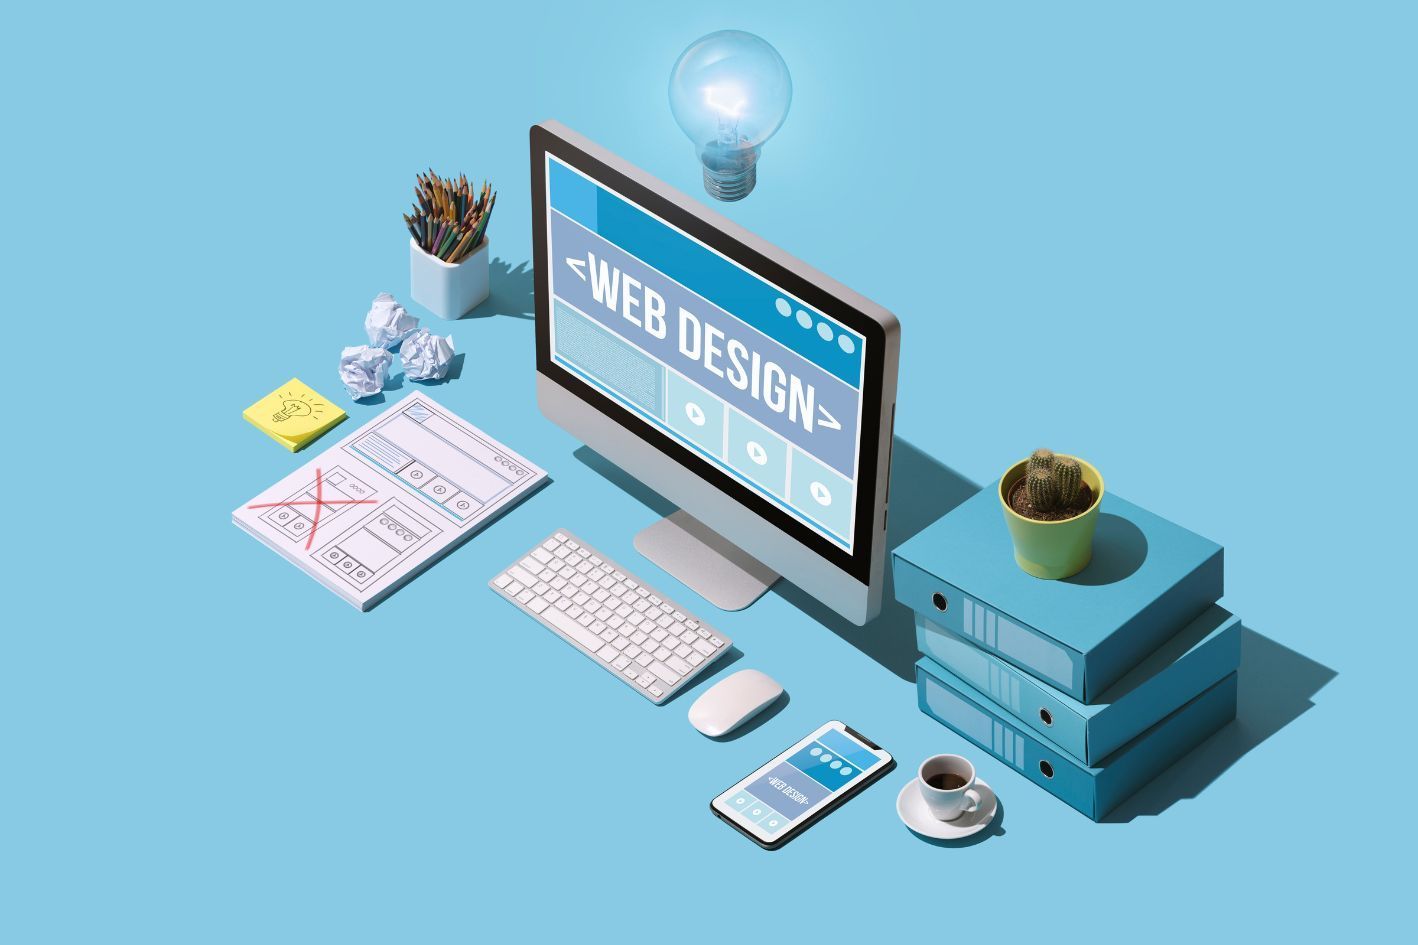 Graphic design for a desk with technology placed on it, such as a computer, keyboard, phone, etc.